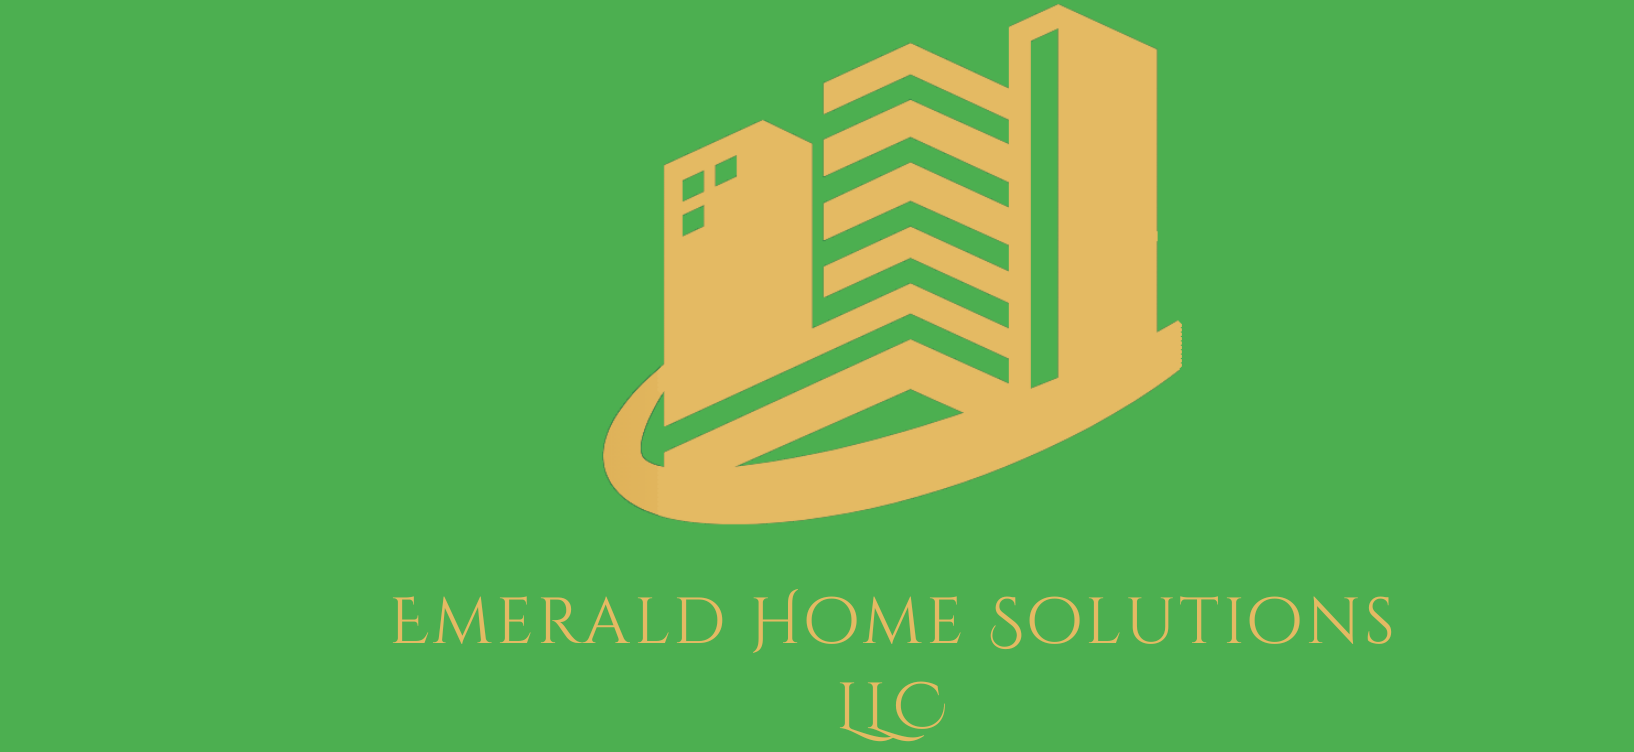 Emerald Home Solutions